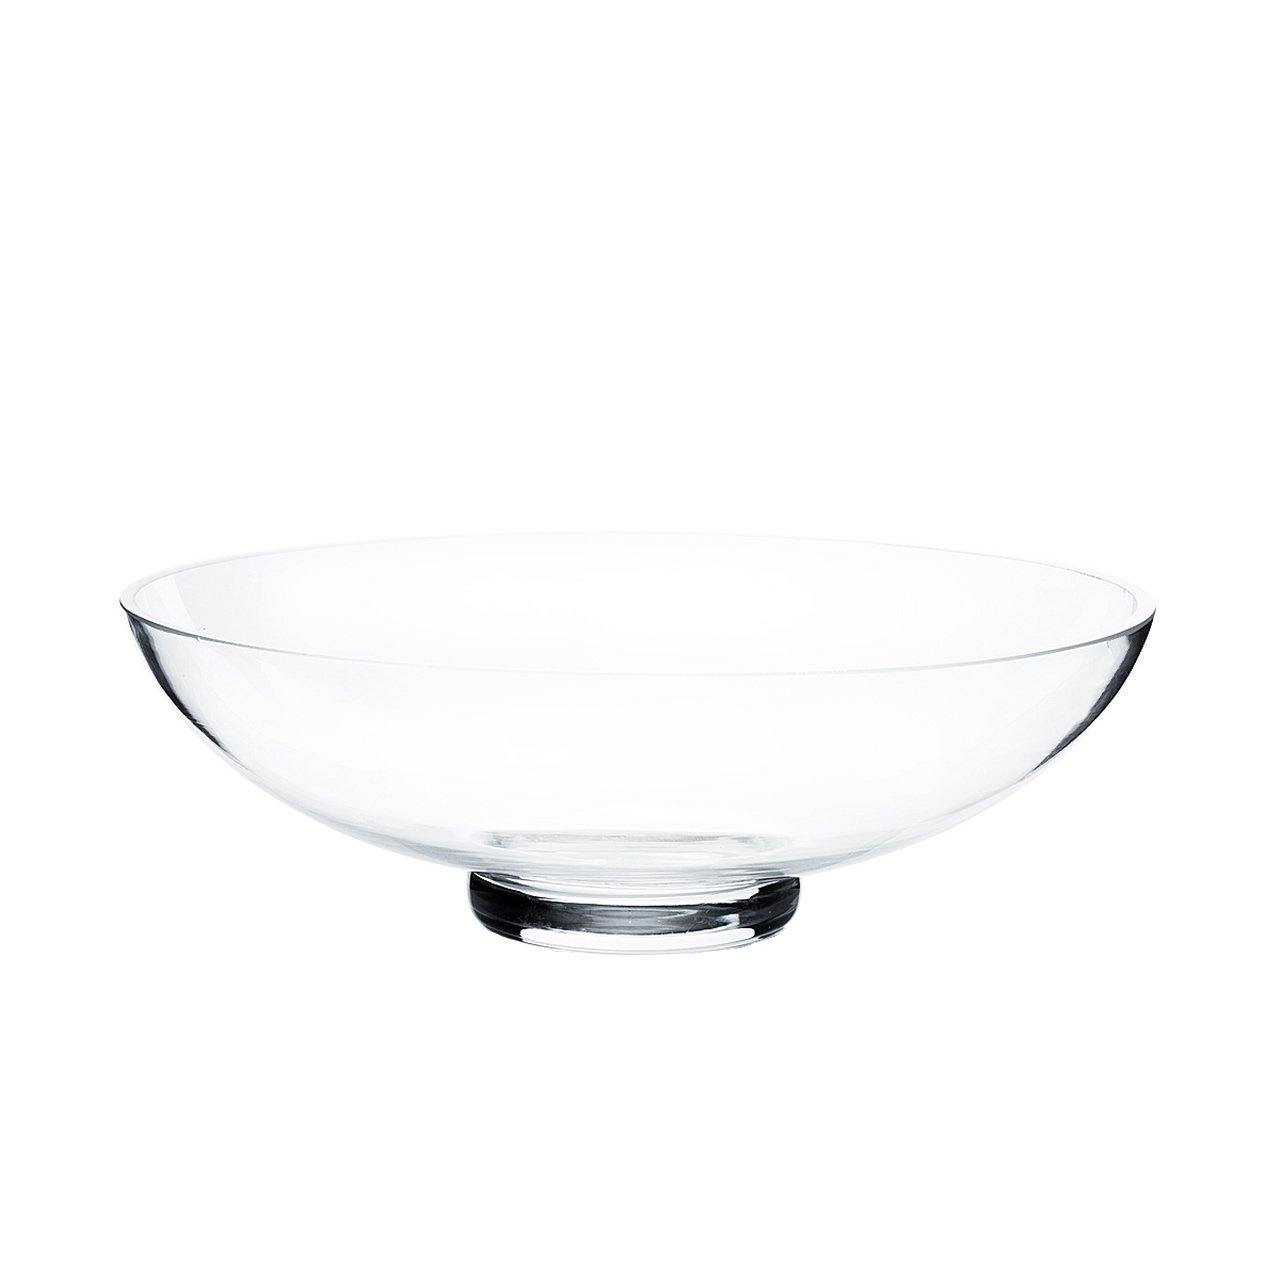 Large Clear Glass Footed Bowl With Lid/ Dish Wedding Centerpiece 7 Liter